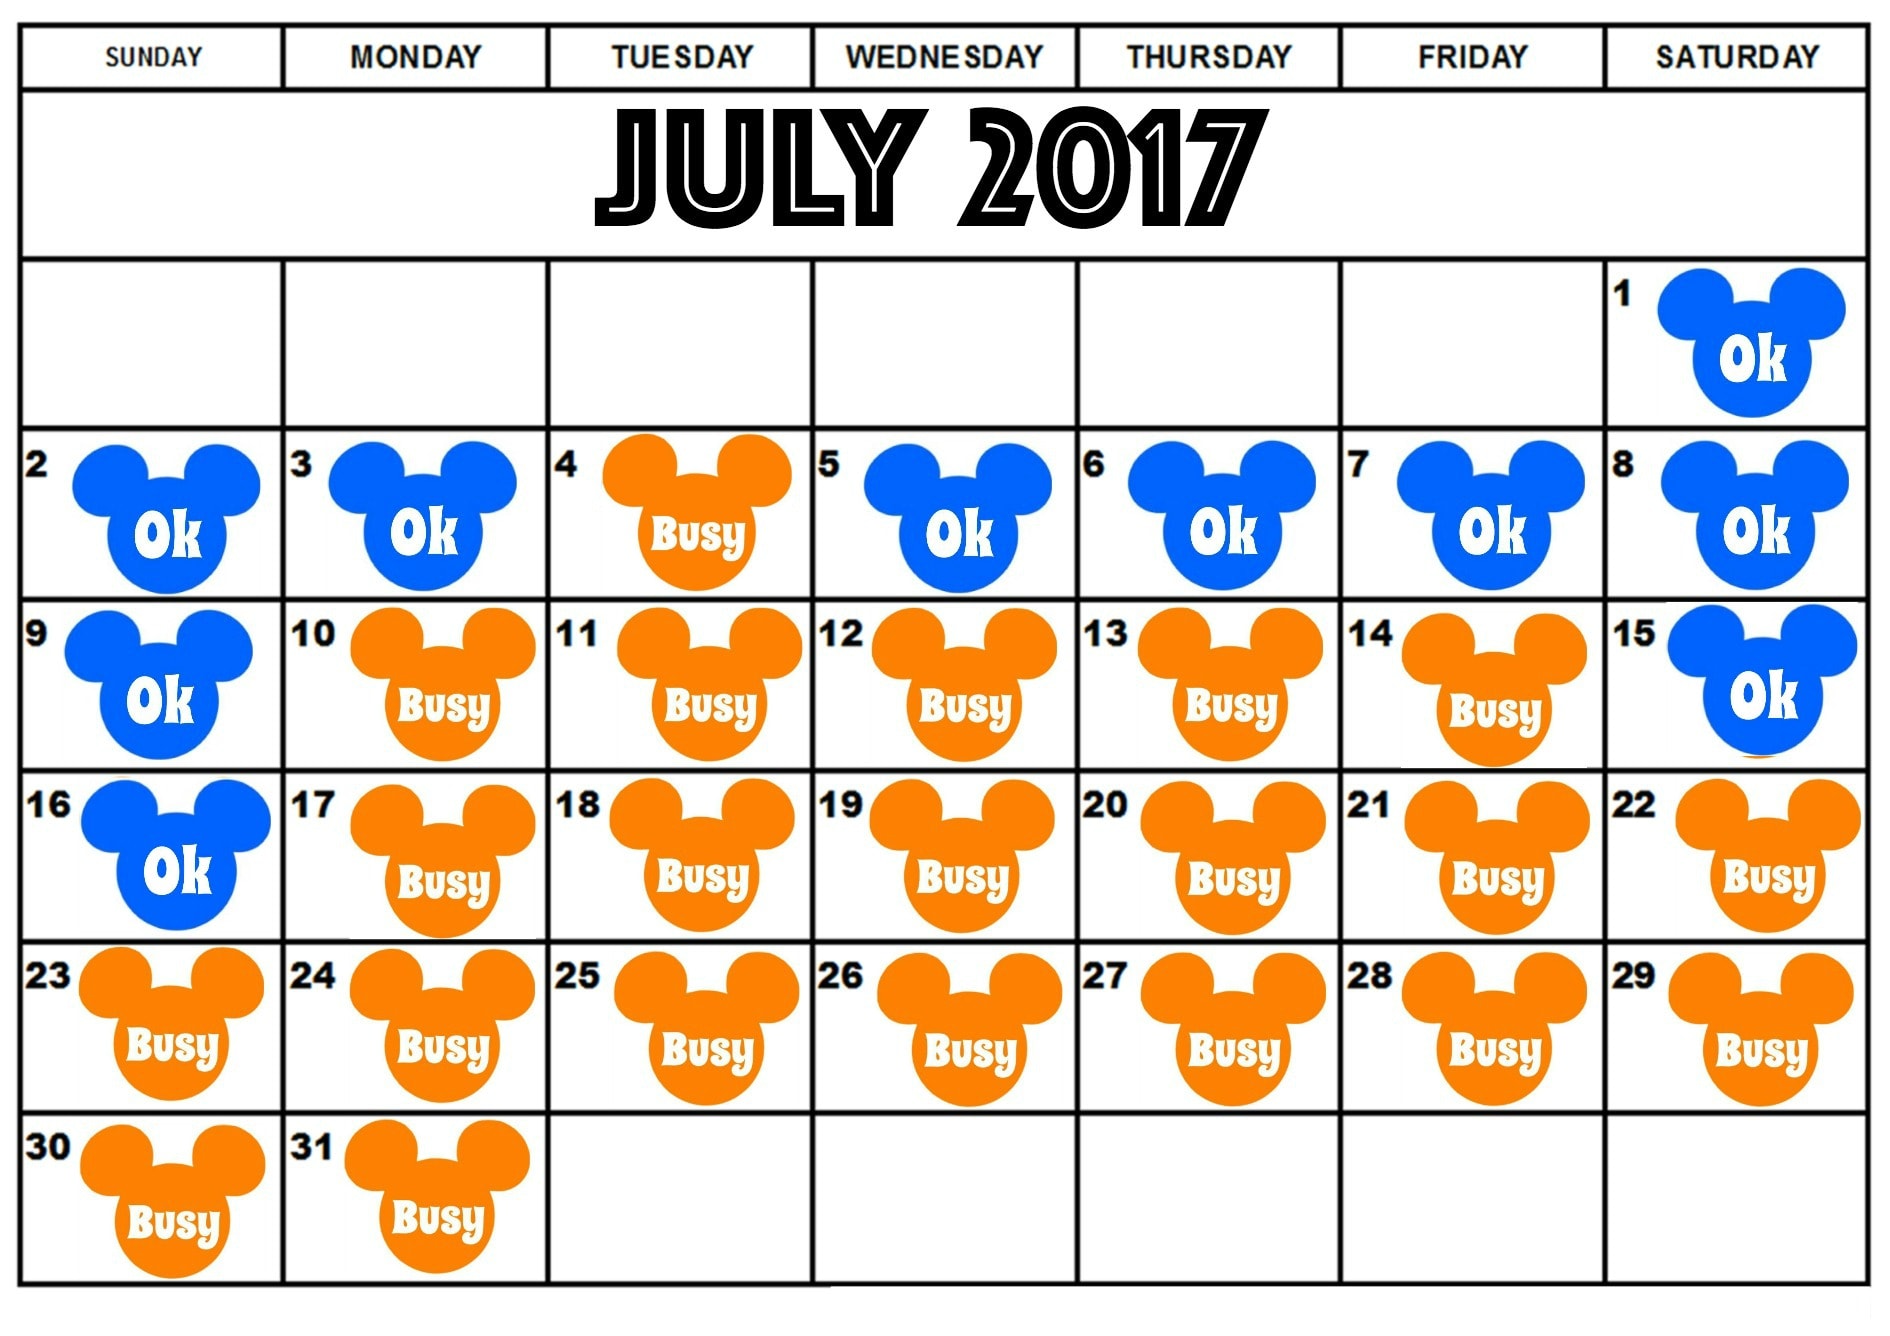 Disneyland Crowd Calendar for July 2017 plus tips to have a great summer at the Disneyland Resort!